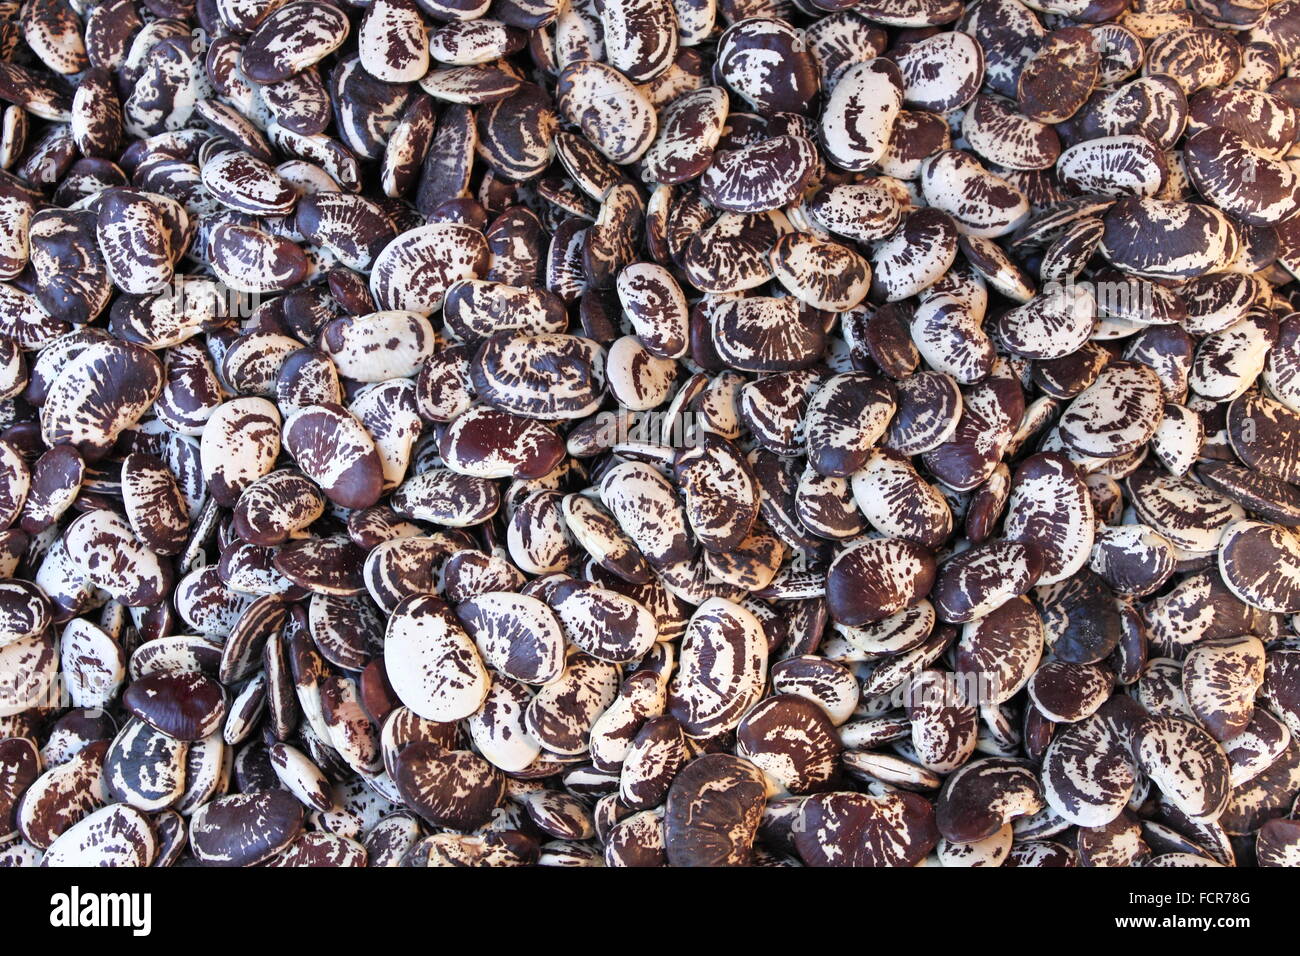 Pinto beans for sale in a grocery store Stock Photo